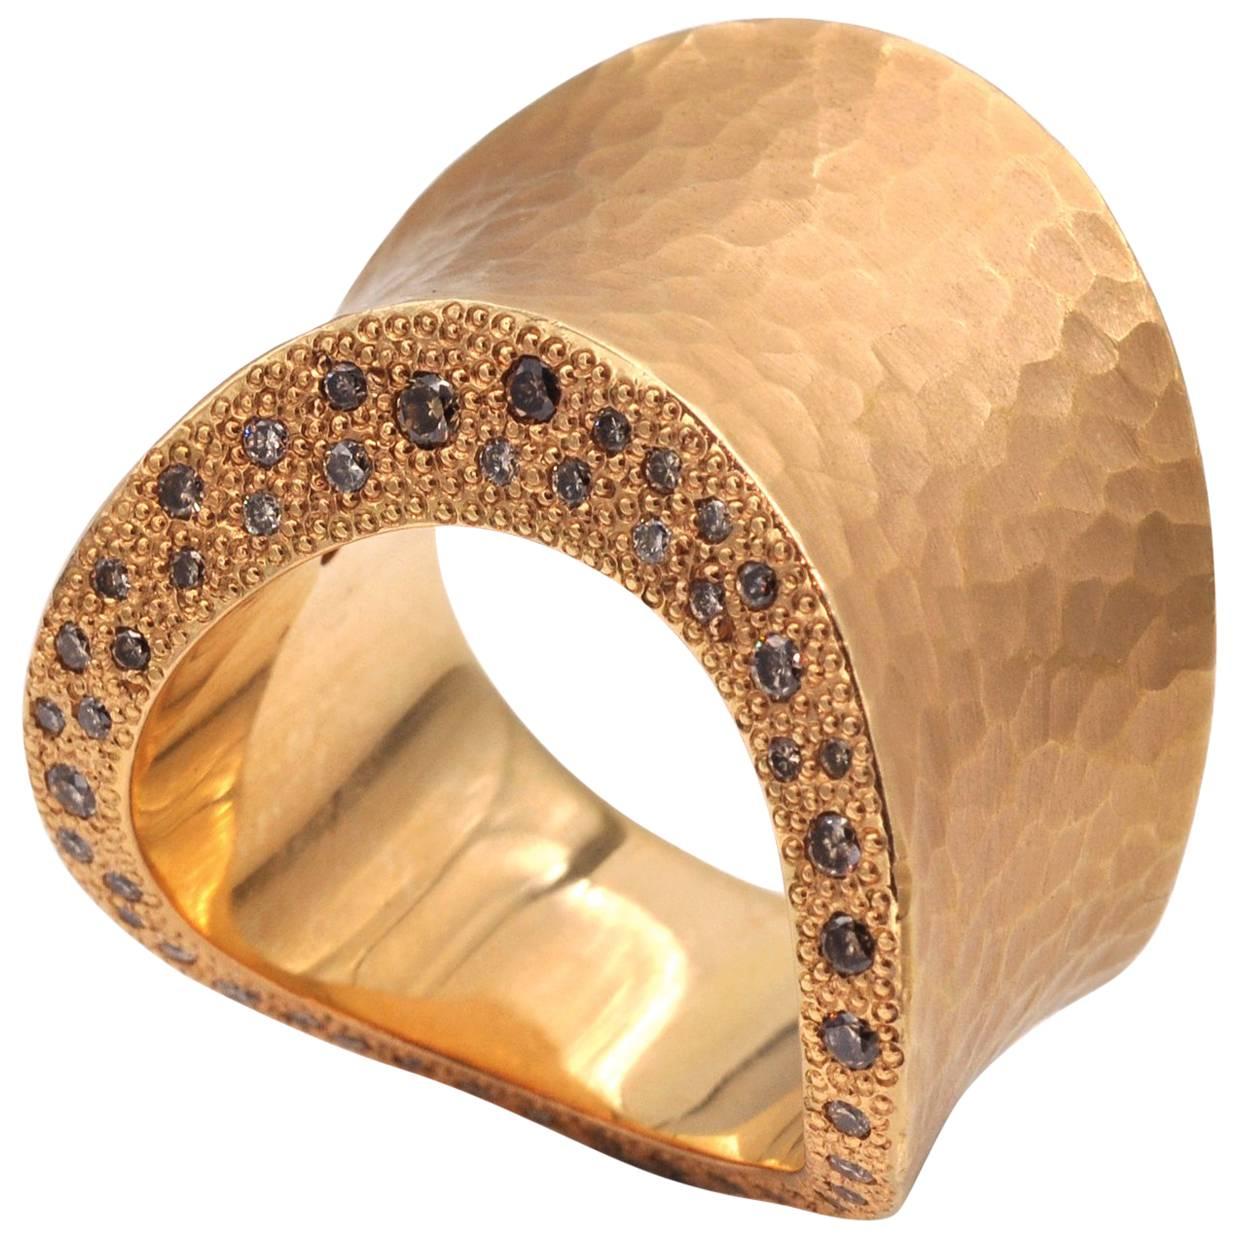 Hammered Rose Gold and Diamonds Ring